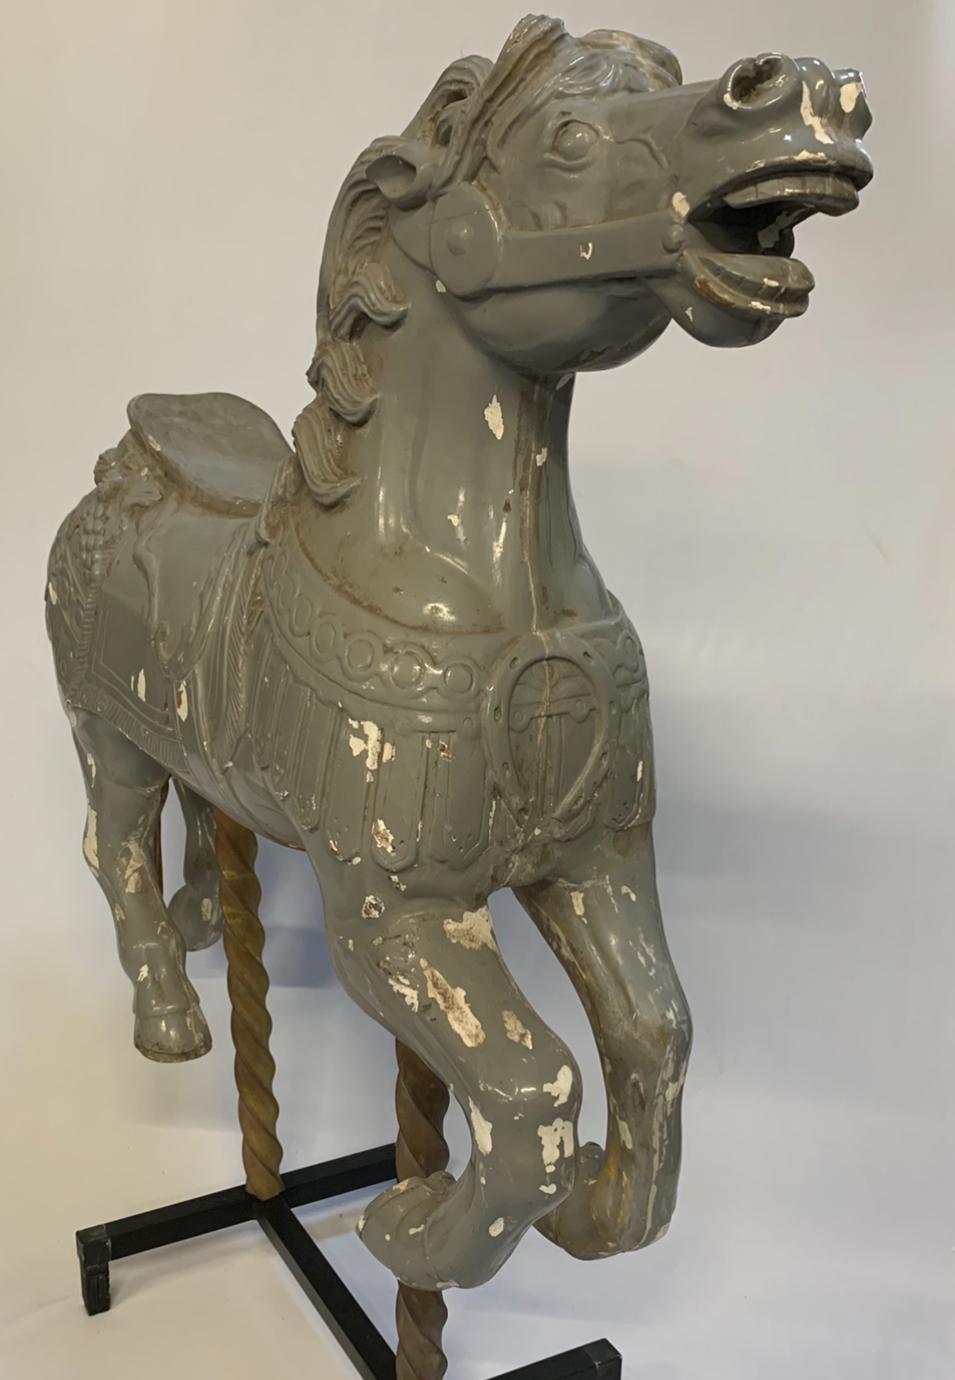 Old juvenile wooden carousel horse in the style of Charles I D Loof and Gustav Denzil 1911. 
Loof built carousels in Coney Island in 1876.
In his lifetime Charles Loof built more than 40 carousels.
Needs some restoration.
Stored in a farm barn